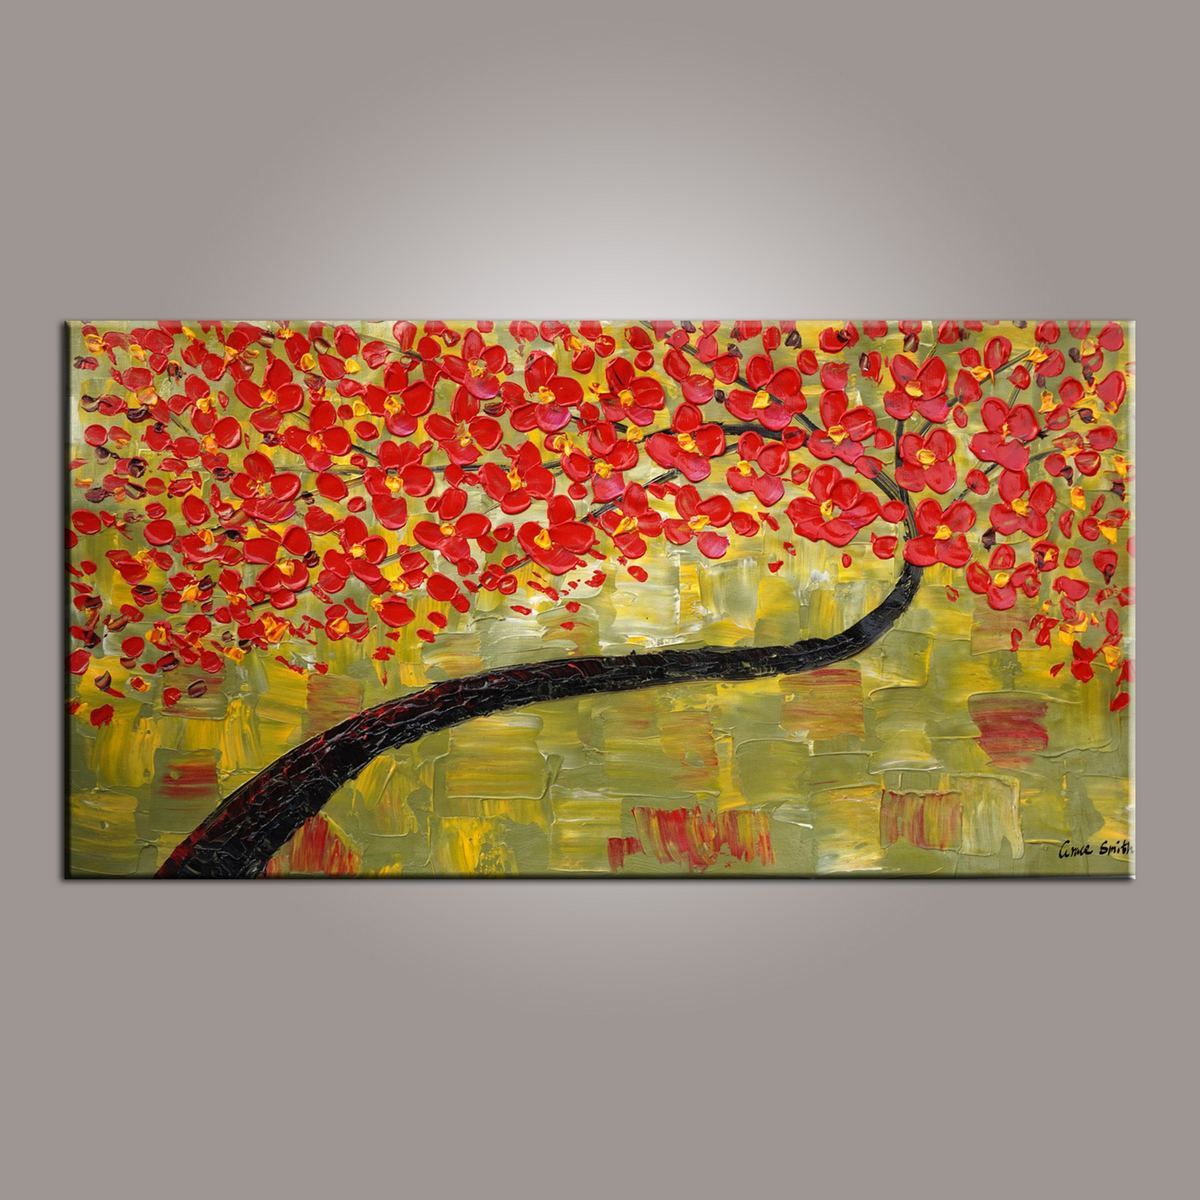 Painting on Sale, Canvas Art, Red Flower Tree Painting, Abstract Art Painting, Dining Room Wall Art, Art on Canvas, Modern Art, Contemporary Art